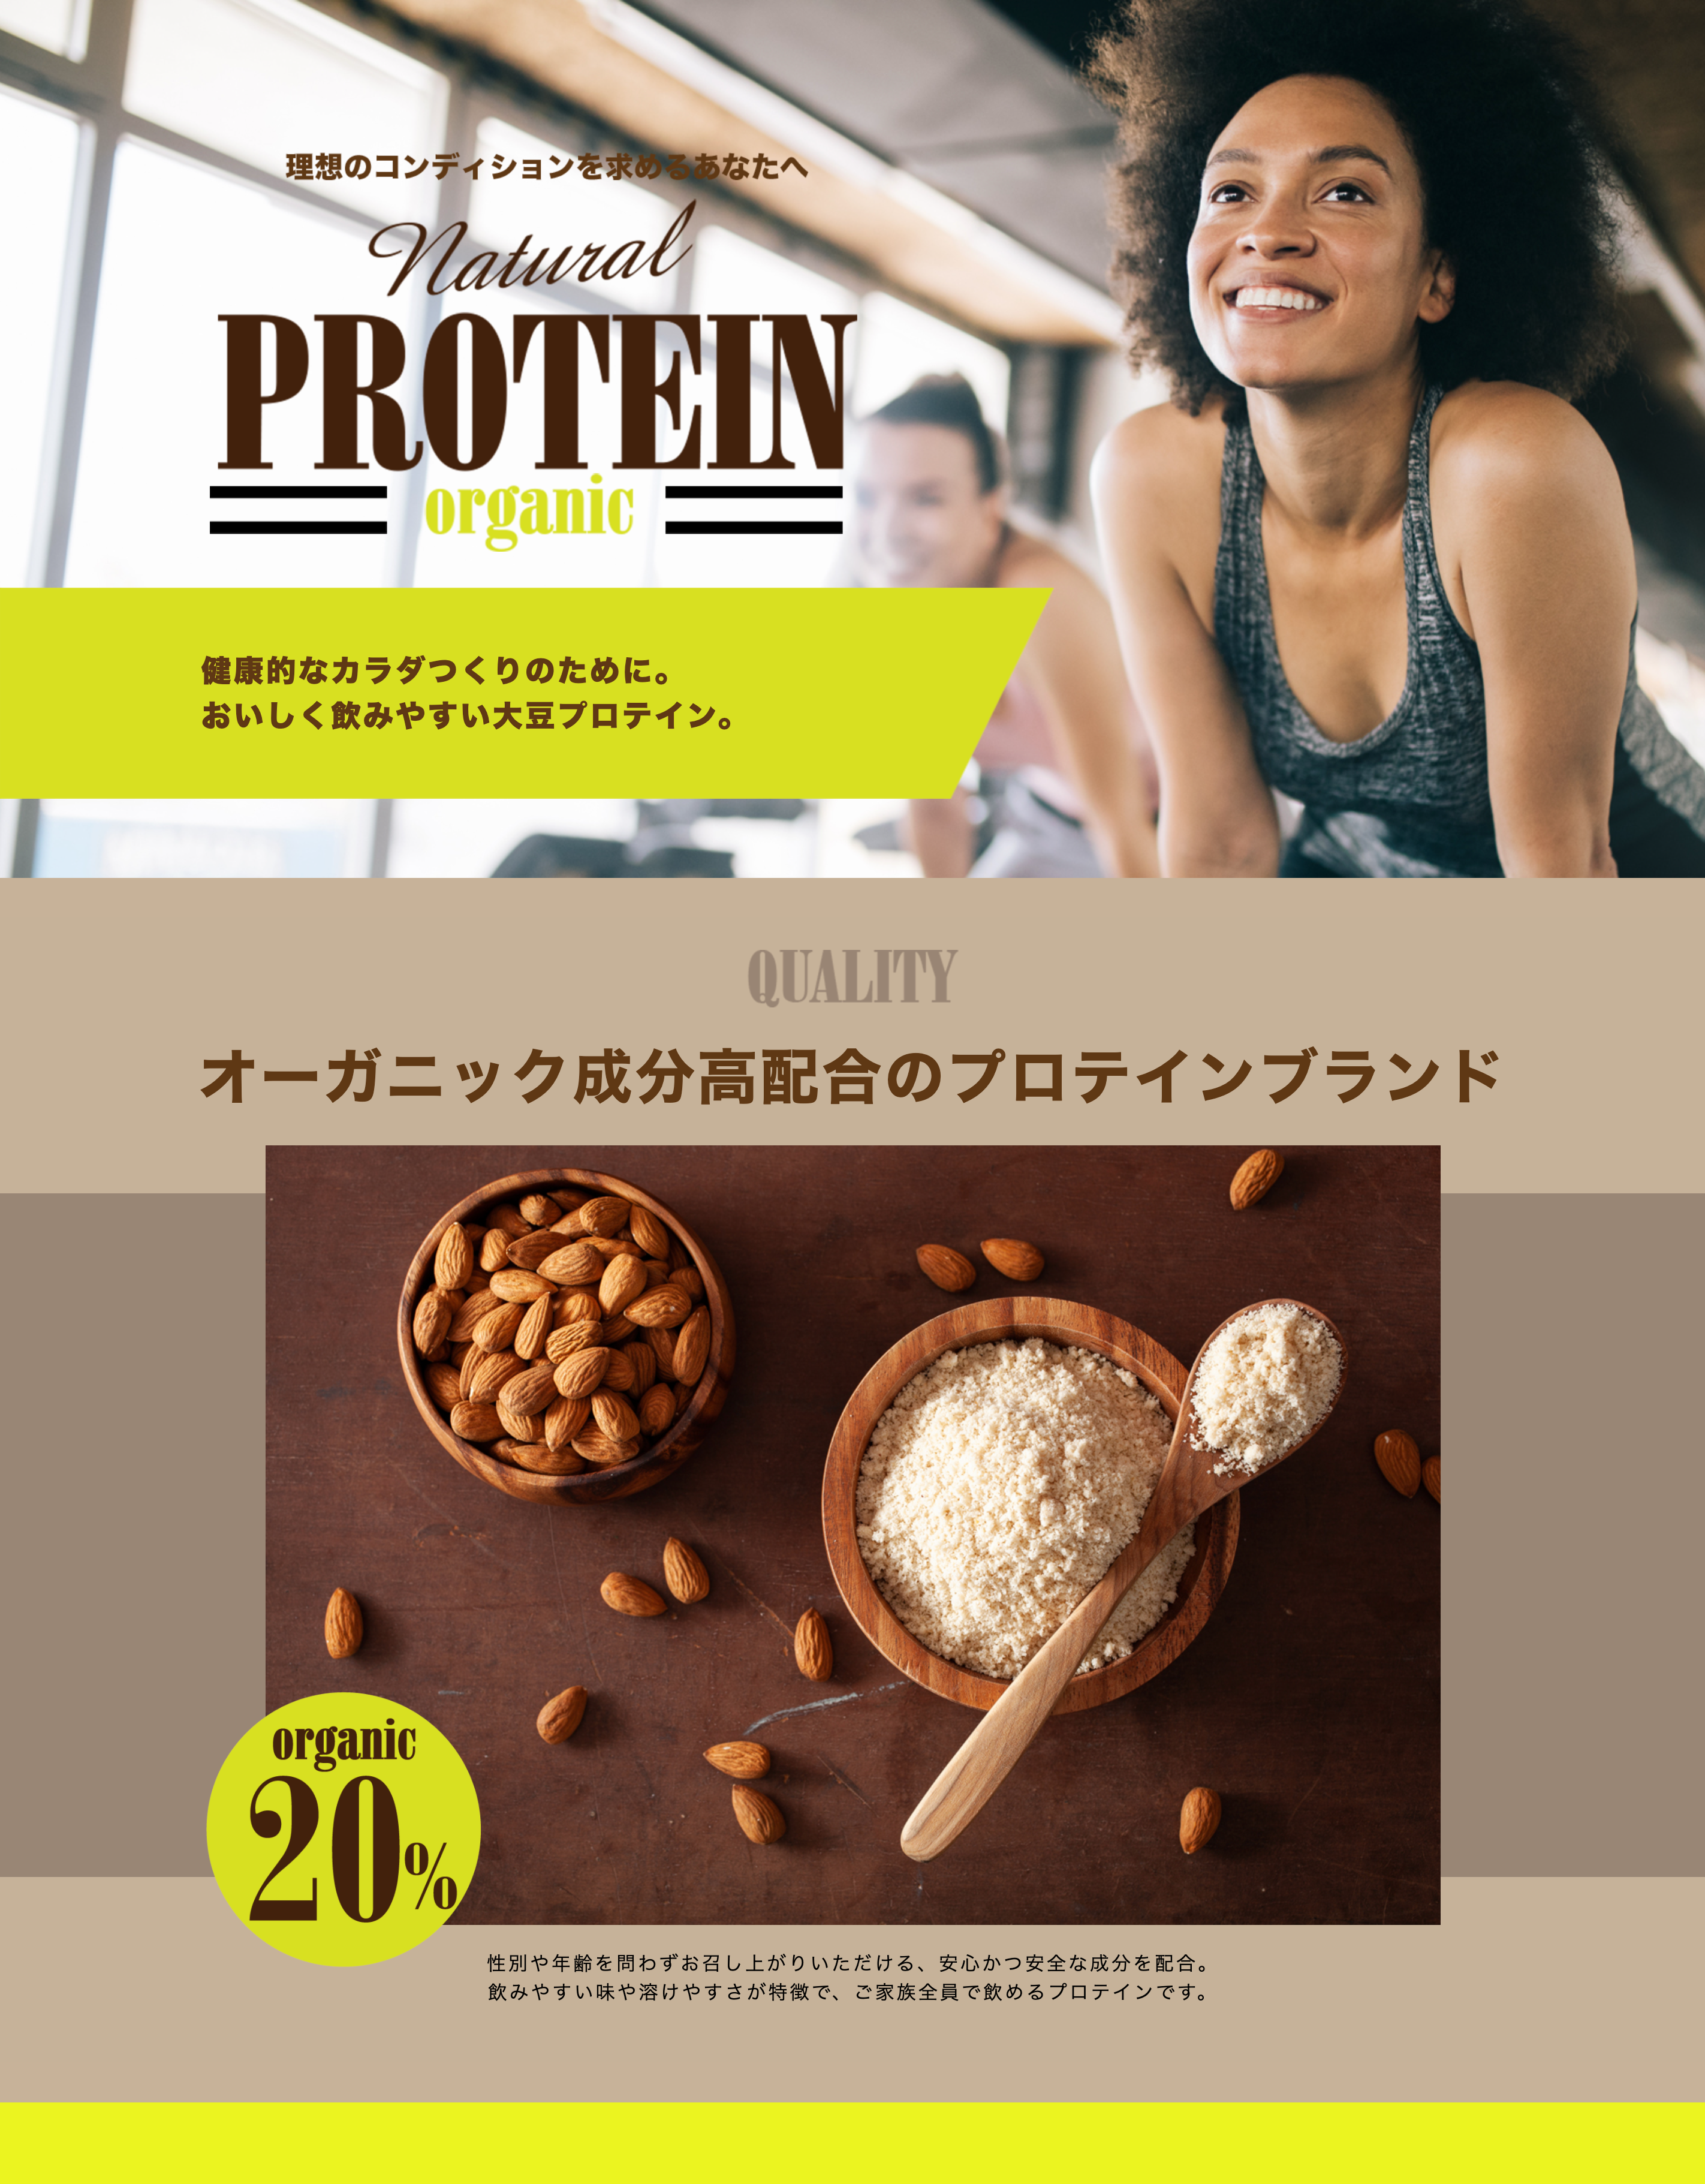 natural PROTEIN